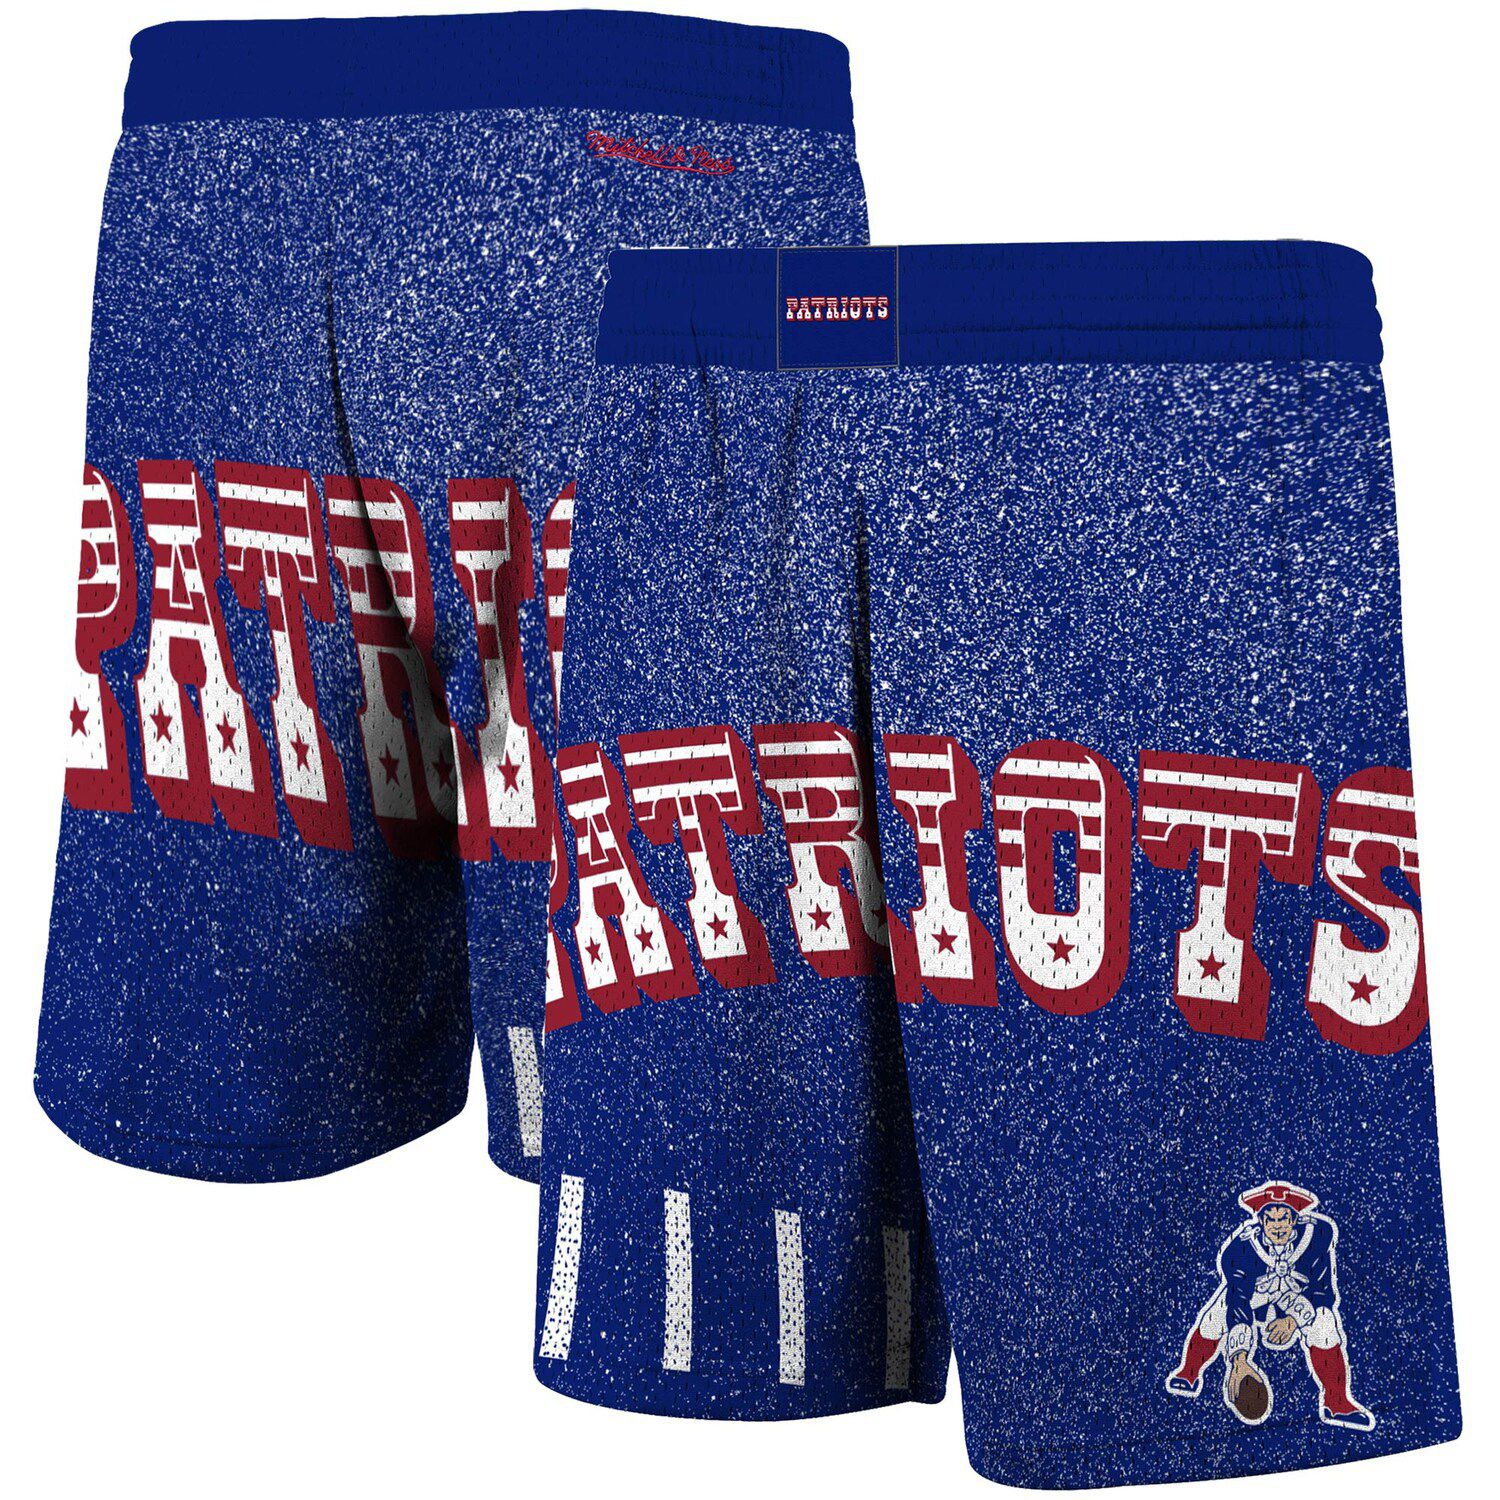 Image for Unbranded Men's Mitchell & Ness Royal New England Patriots Jumbotron Shorts at Kohl's.